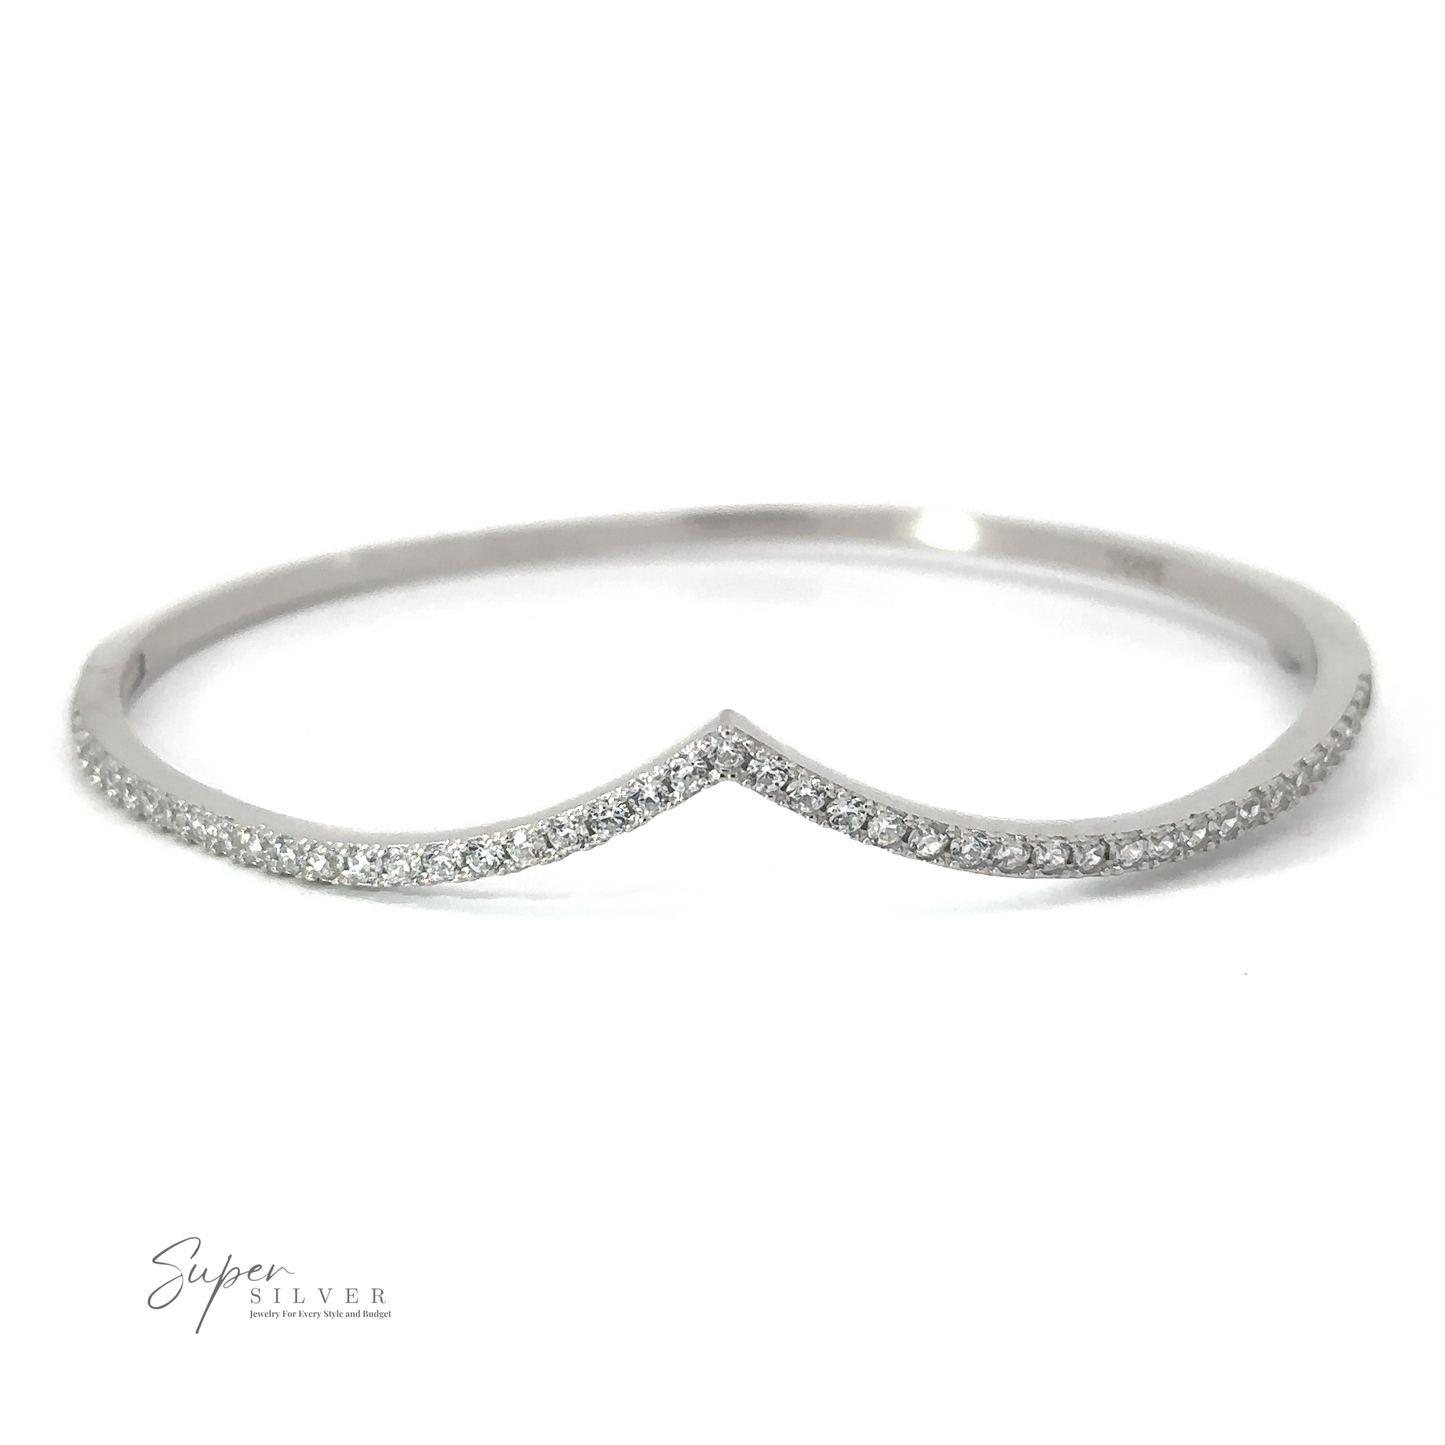 A silver, V-shaped bangle with a thin line of small, evenly distributed diamonds. The Cubic Zirconia Chevron Latch Bracelet has a minimalist design and appears delicate. The Rhodium Plated Sterling Silver adds an extra touch of elegance. The logo "Super Silver" is visible in the bottom left corner.